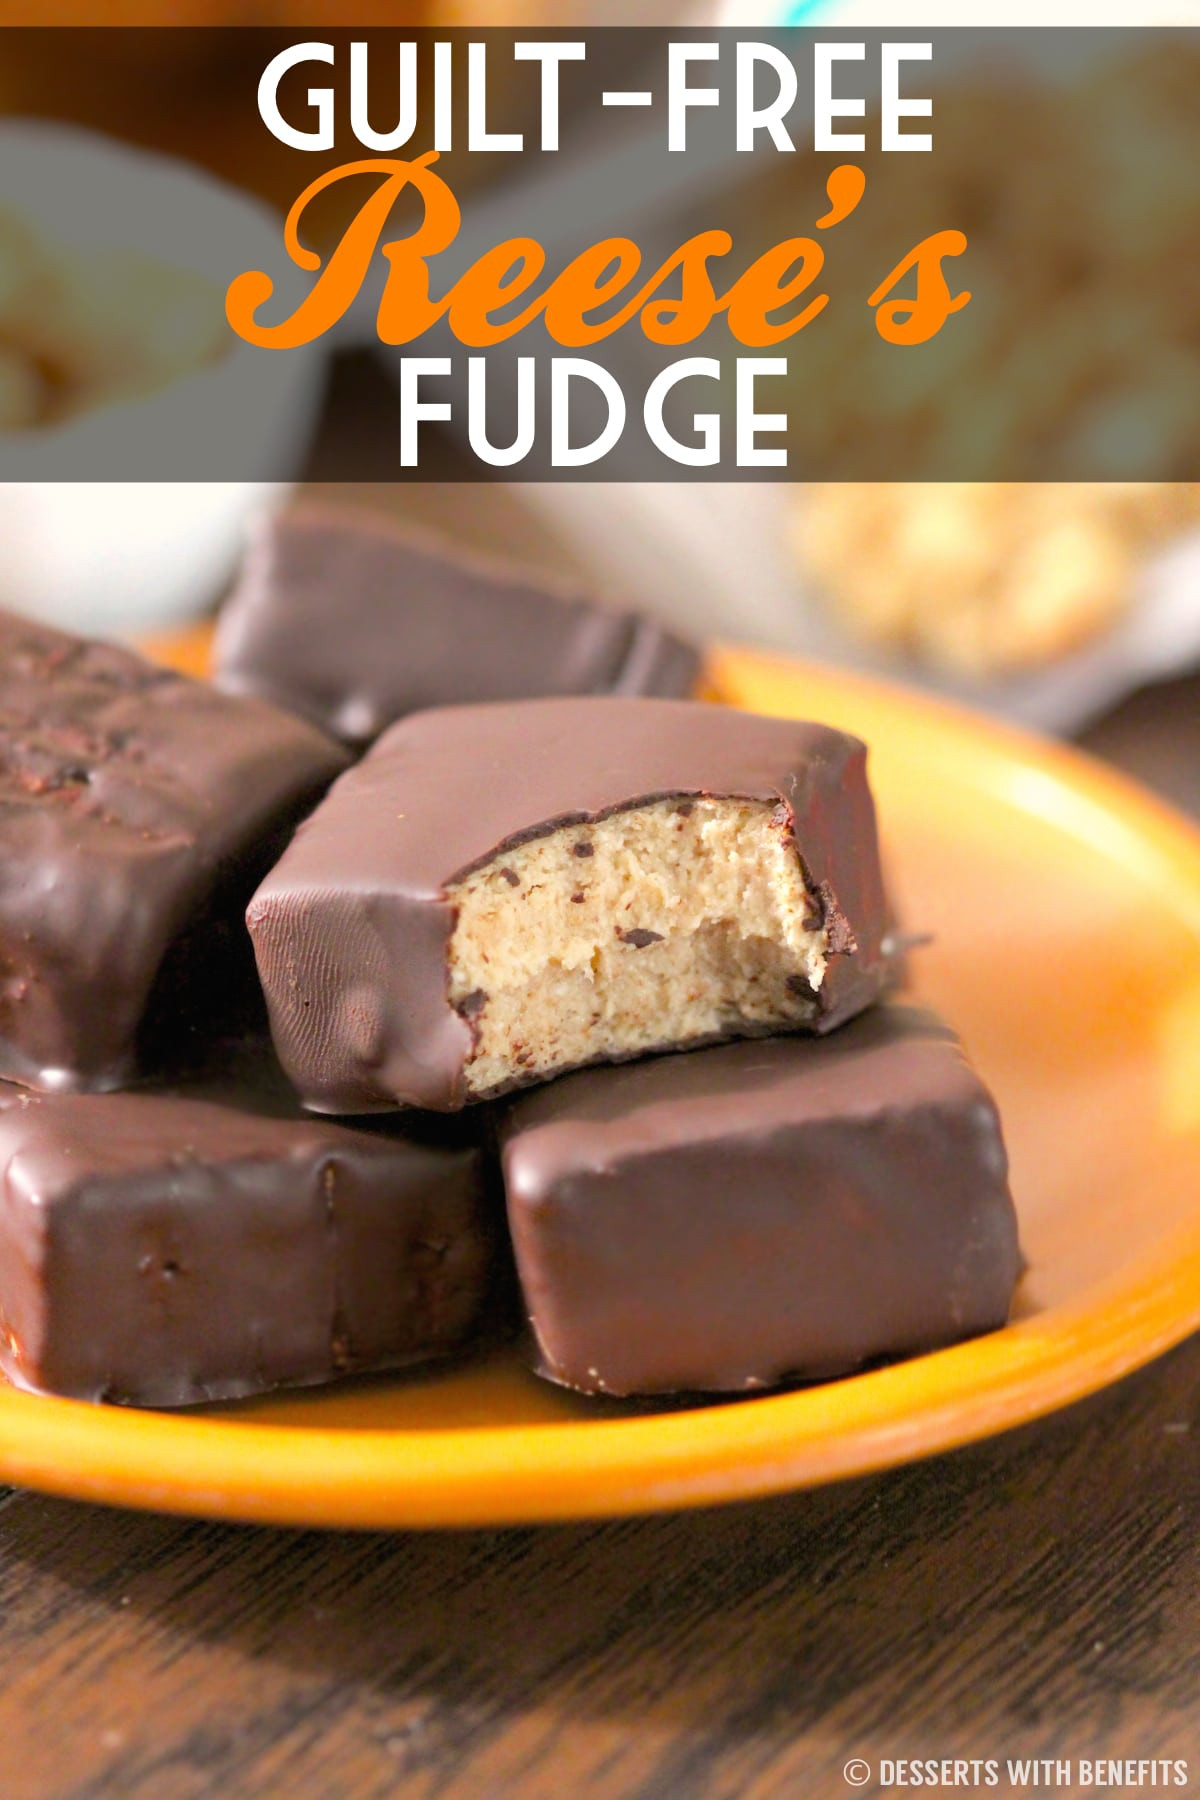 Low Sugar Low Fat Desserts
 Healthy Reese s Fudge Desserts with Benefits